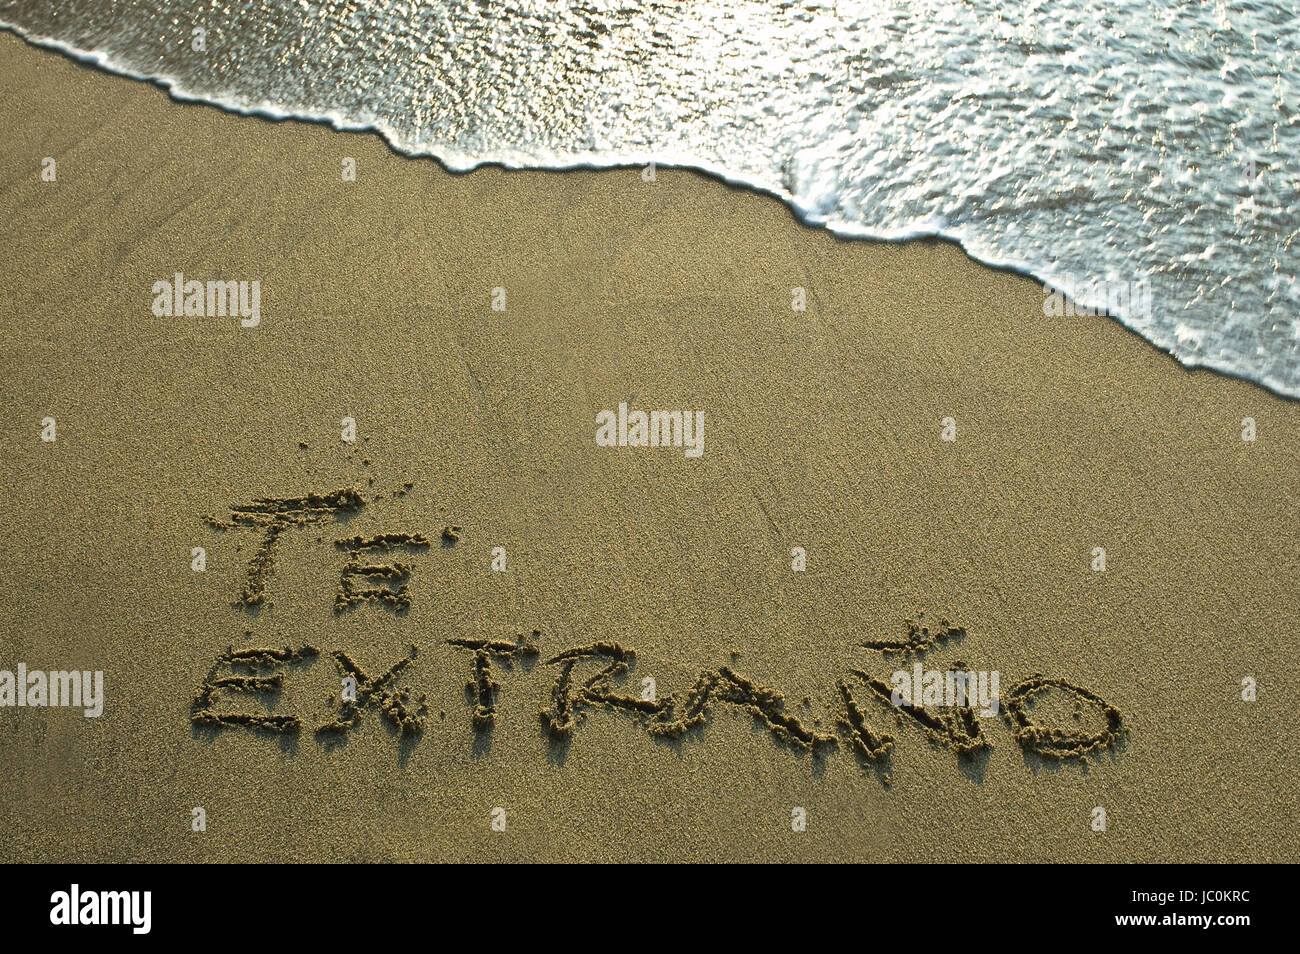 i miss you sentence on the sand of a beach Stock Photo